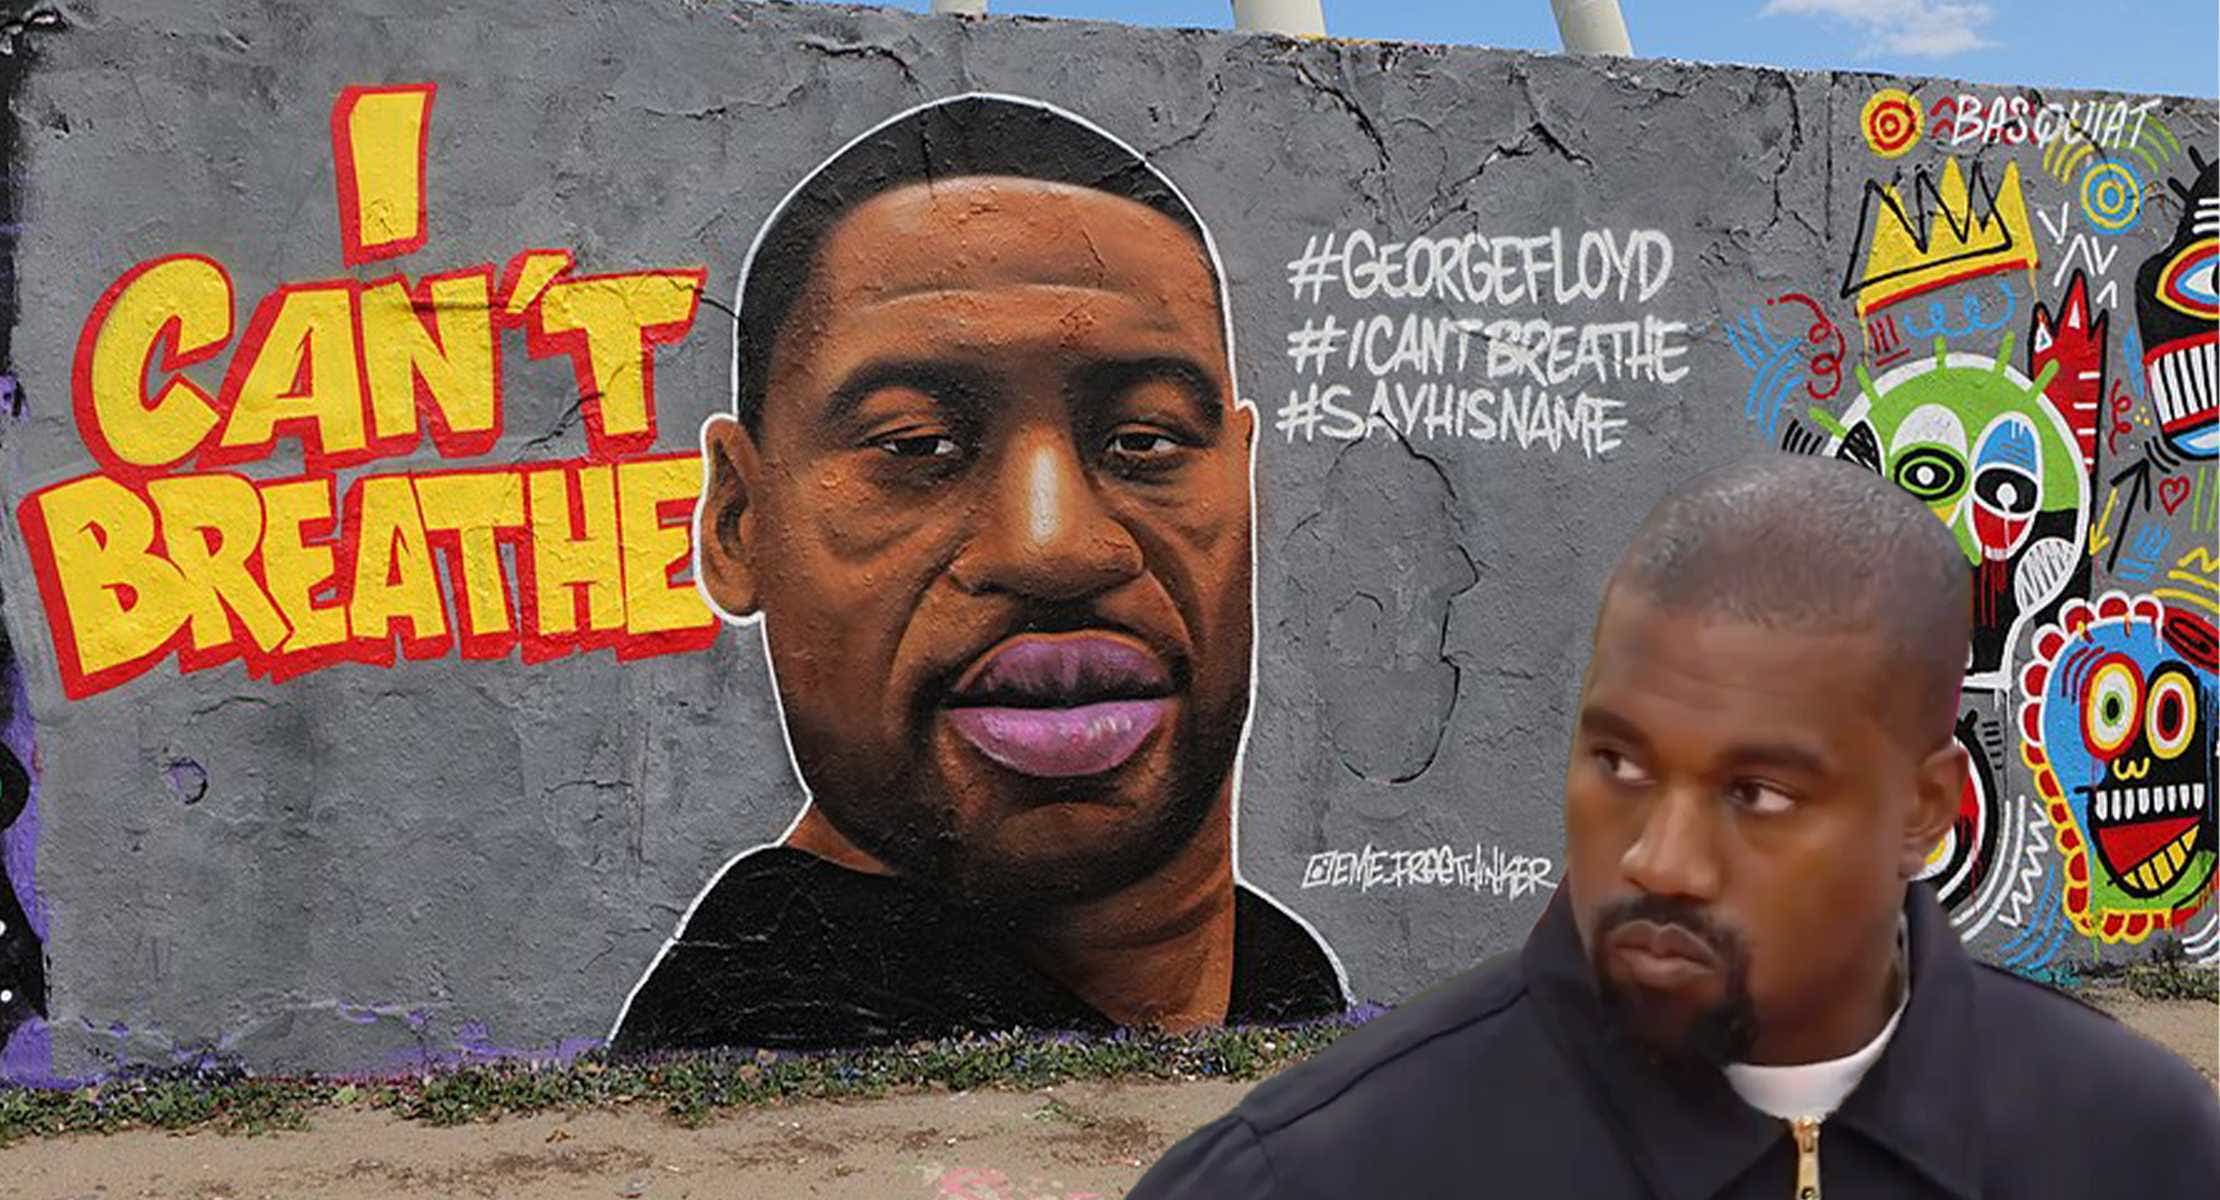 Kanye West Apologizes For George Floyd Remarks As He Lashes Out At Jewish Execs And Media